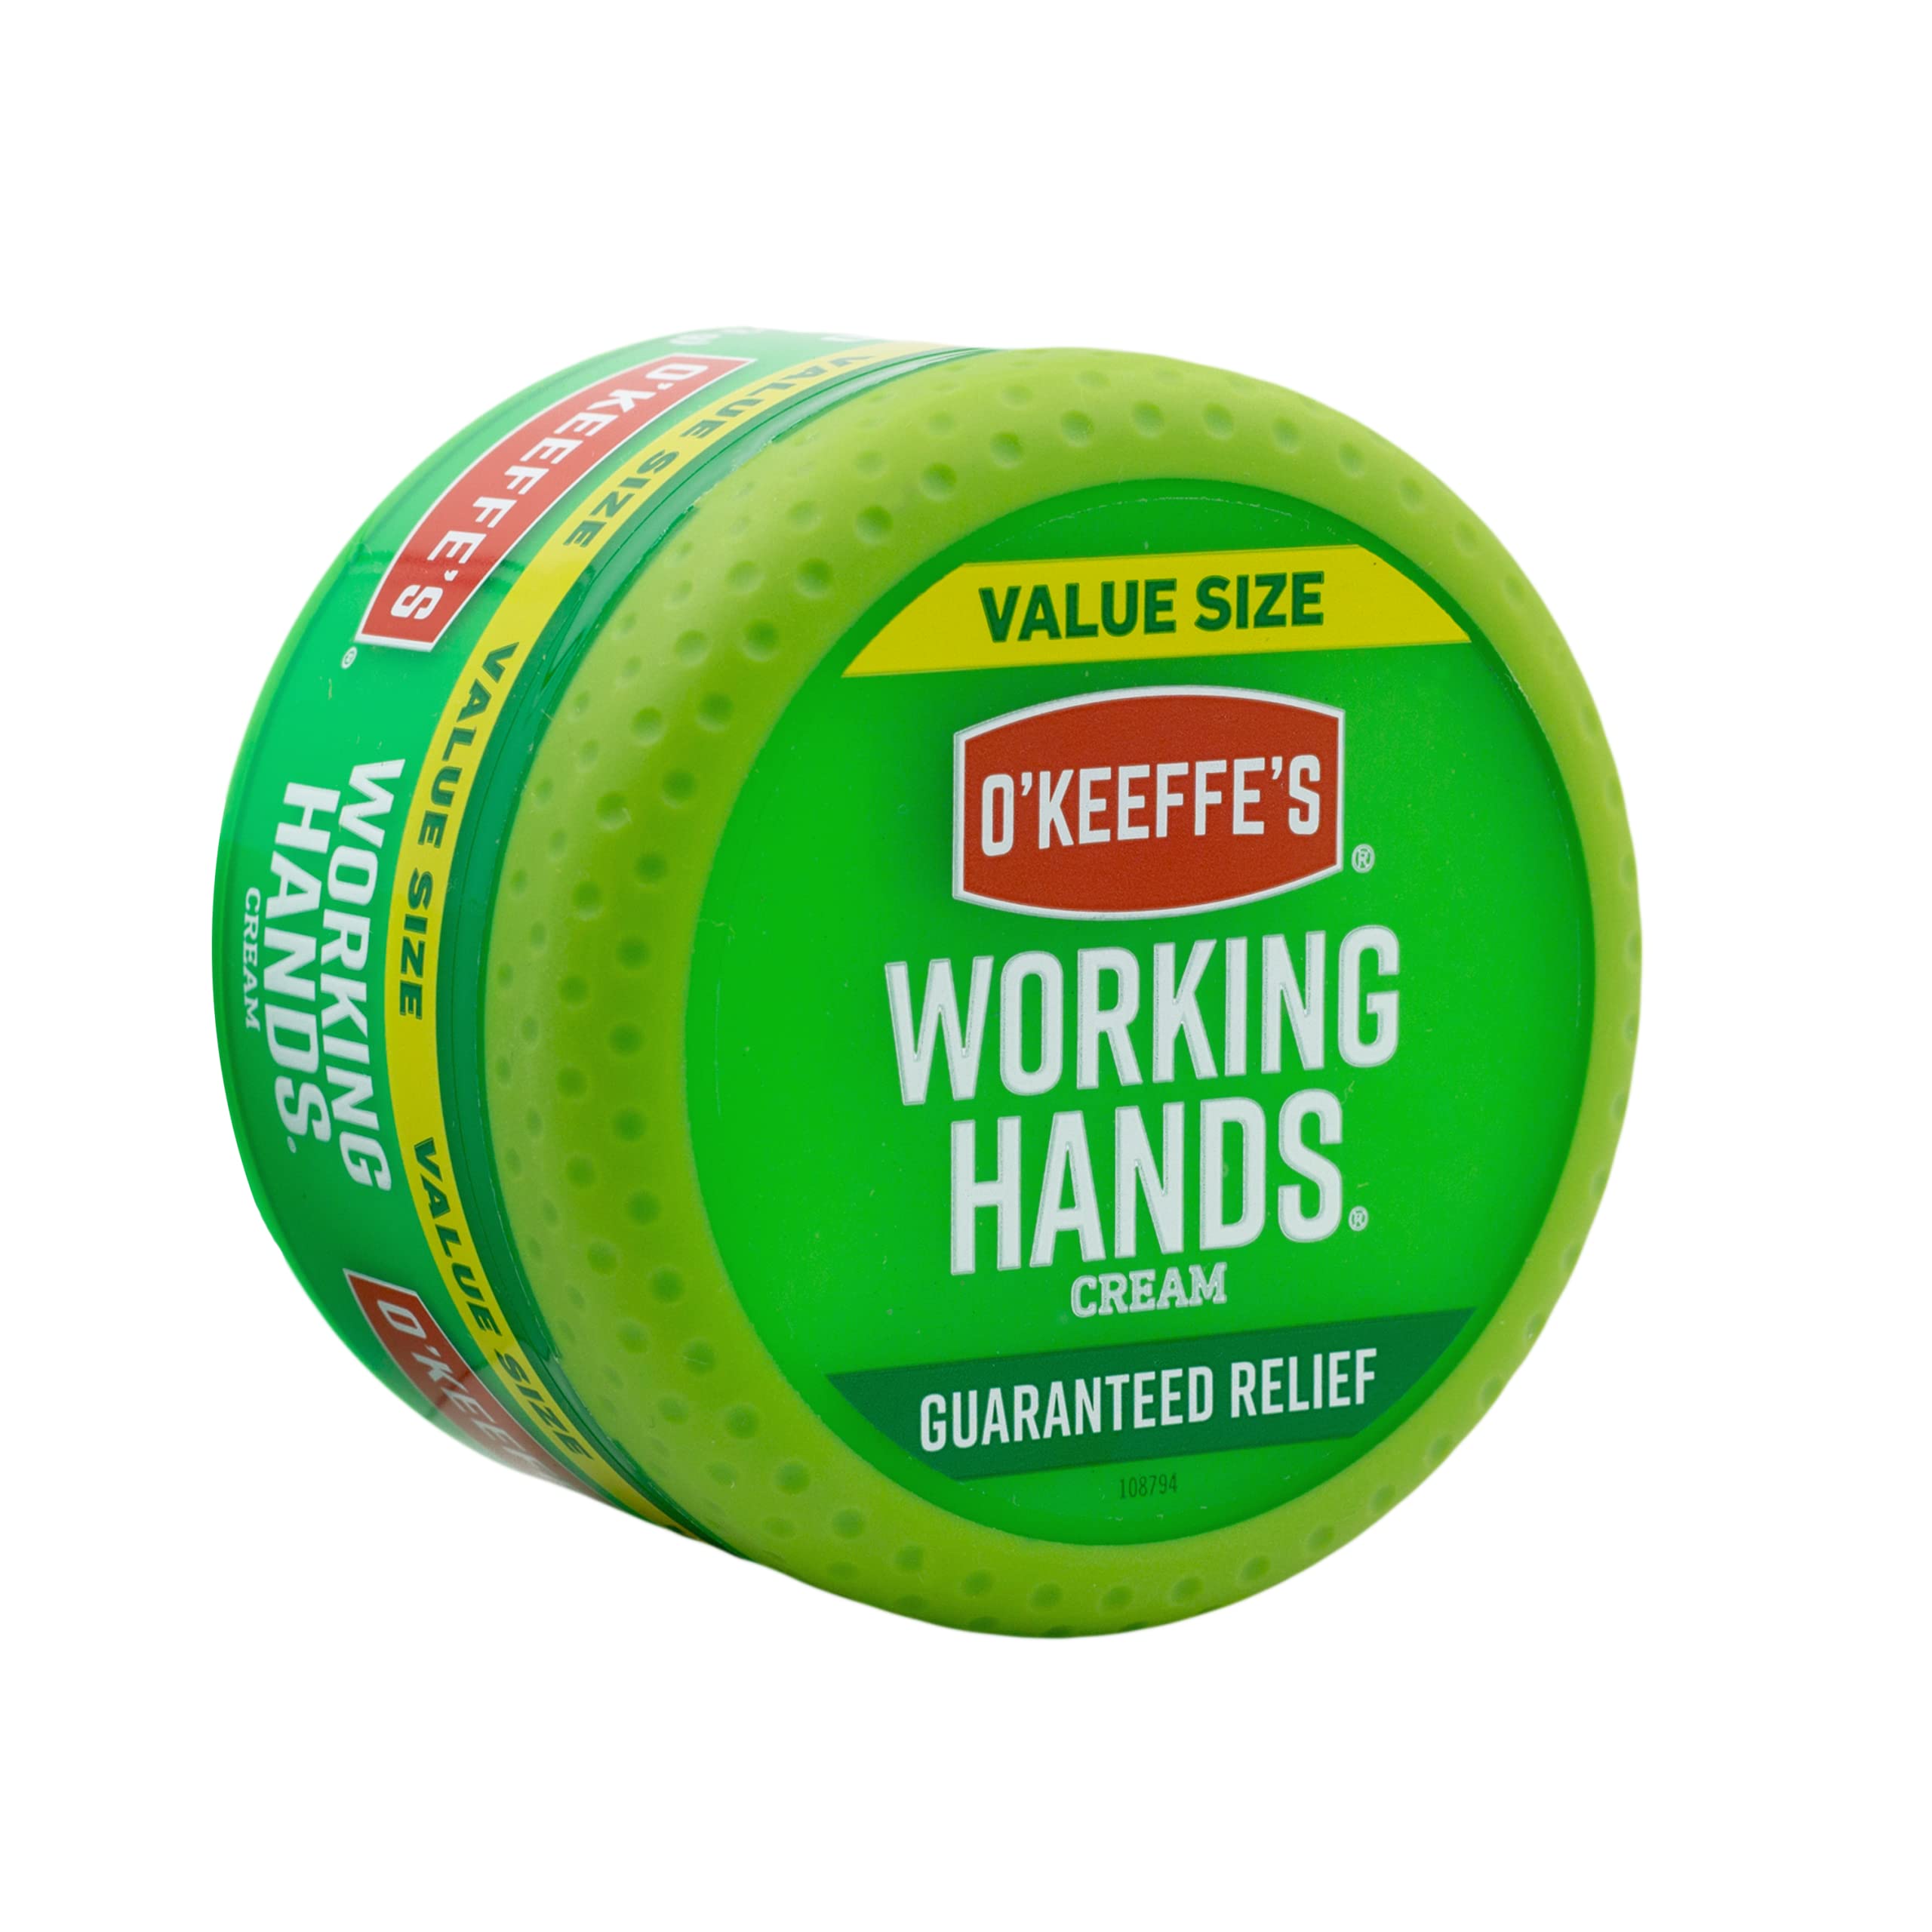 O'Keeffe's Working Hands Hand Cream, For Extremely Dry, Cracked Hands, 6.8 oz Jar (Value Size, Pack of 2)